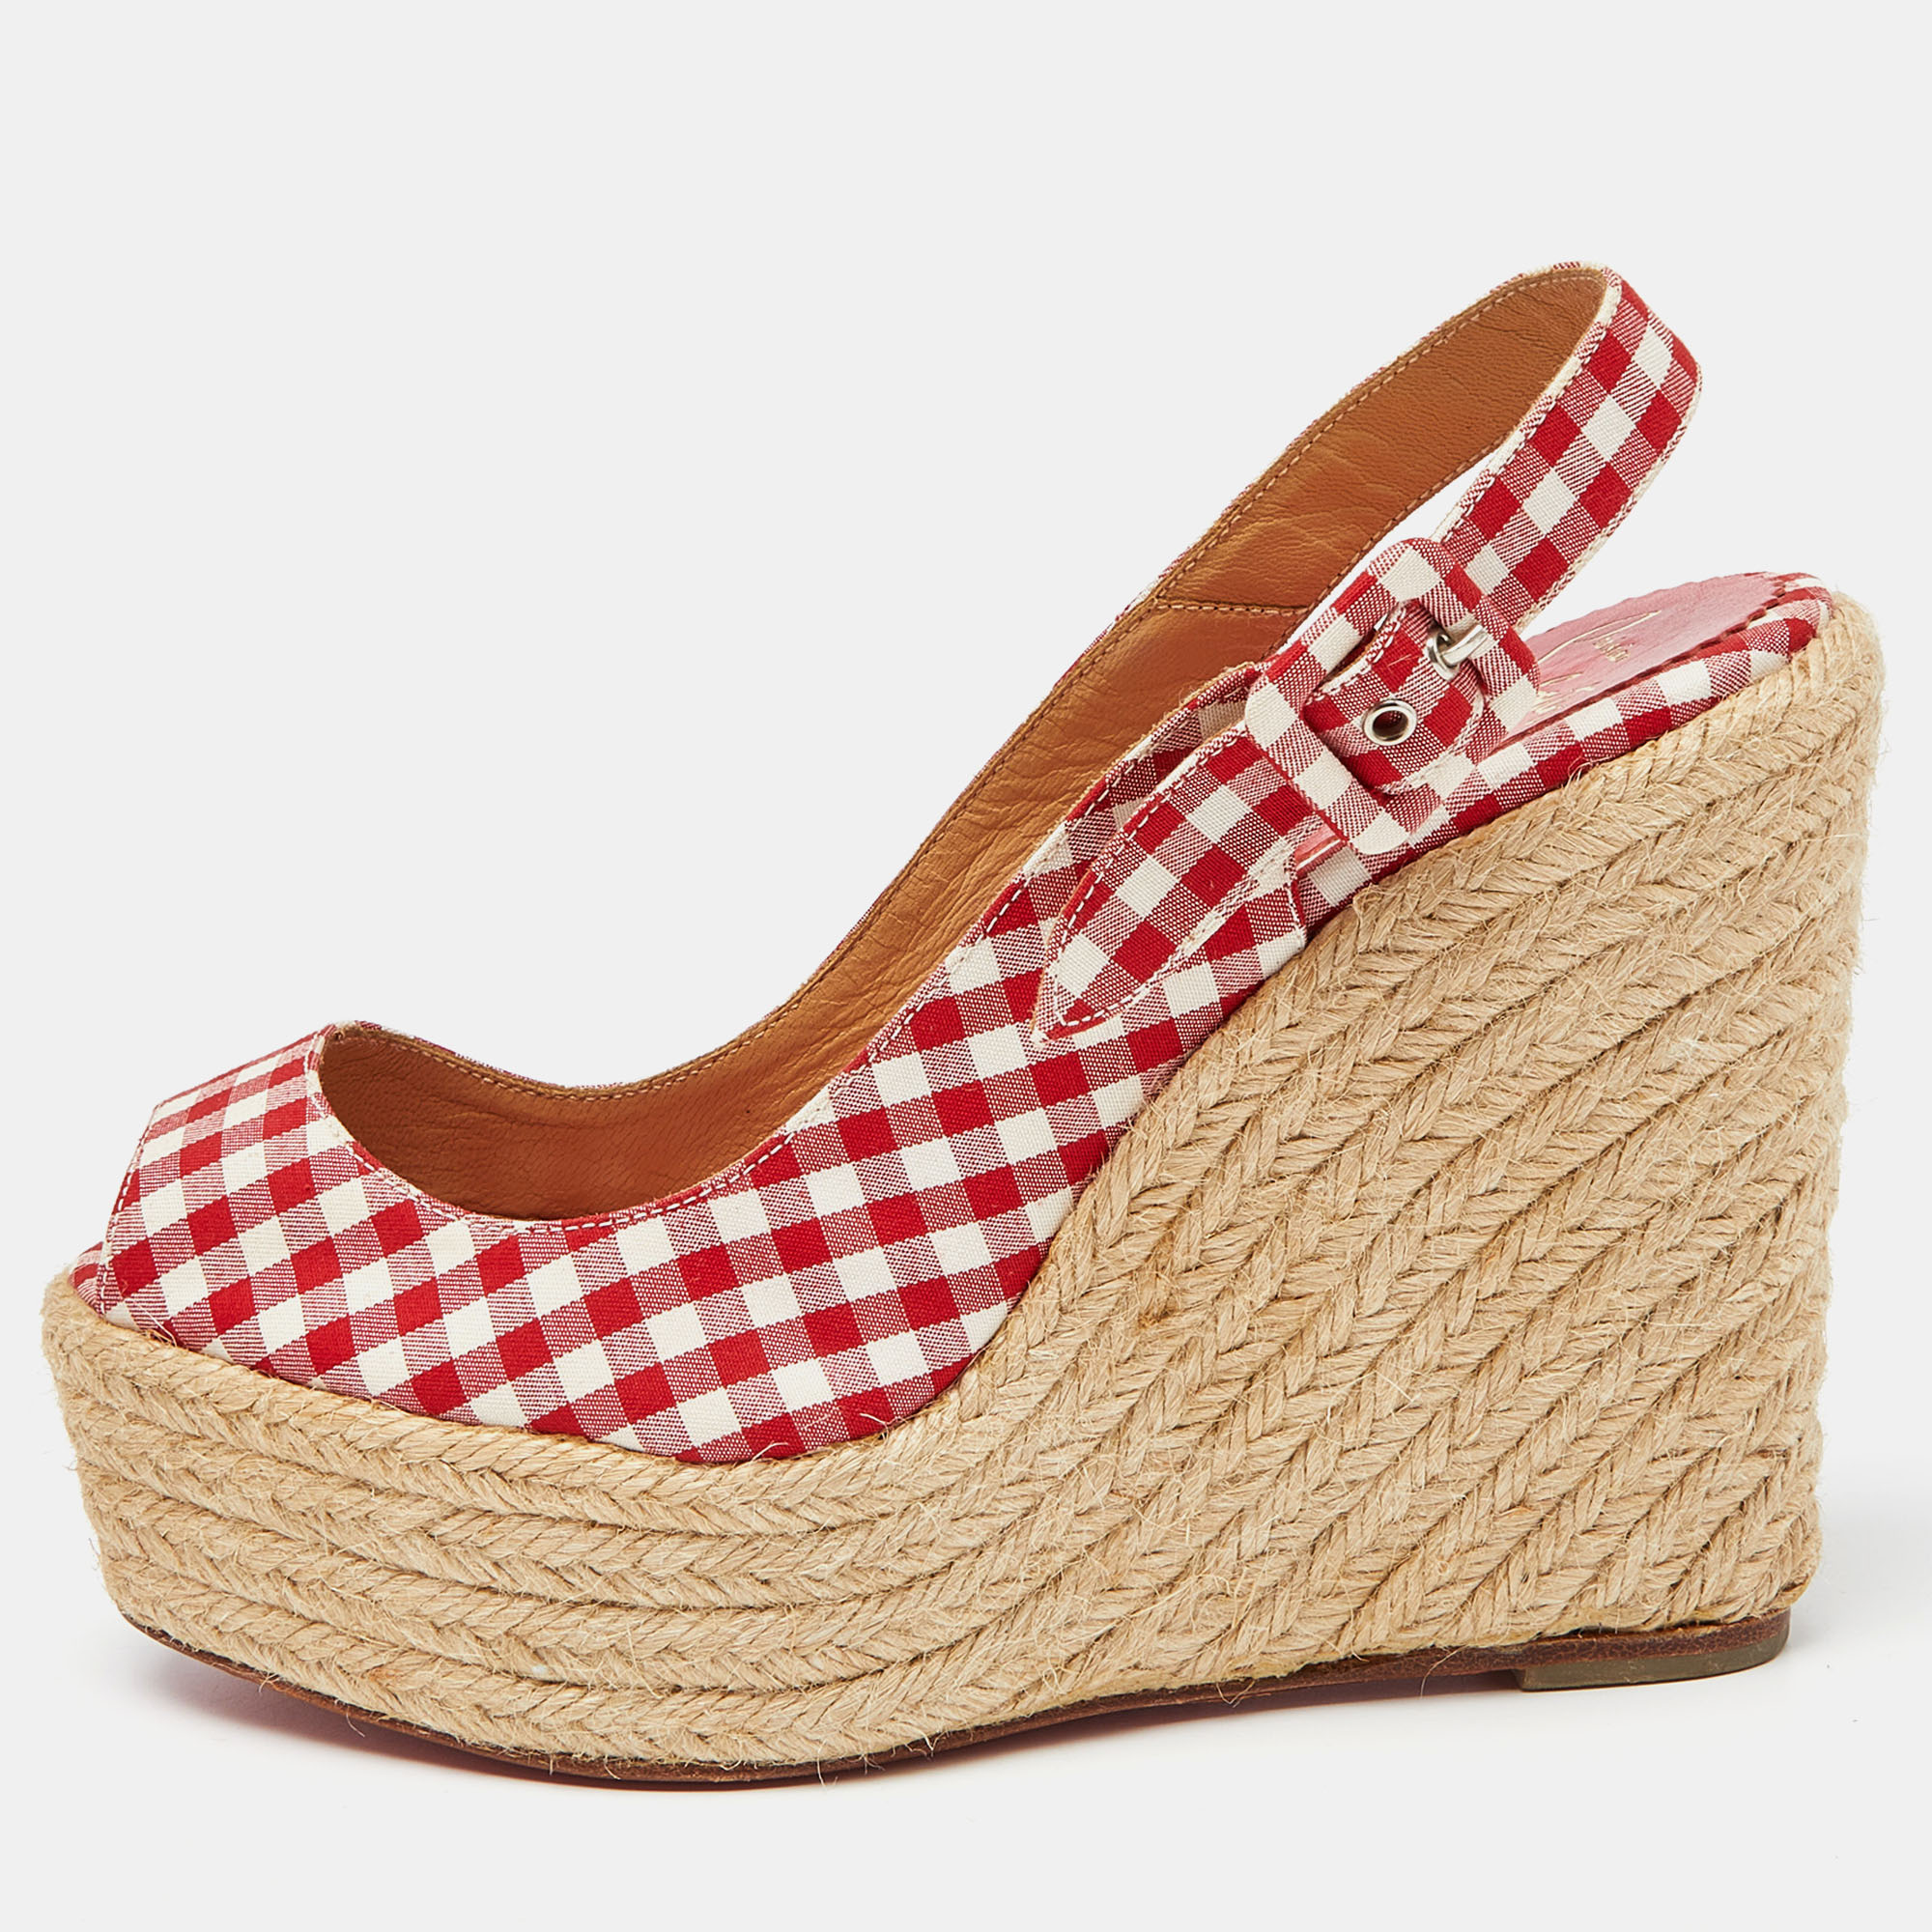 

Christian Louboutin Red/White Gingham Fabric Menorca Espadrille Wedge Pumps Size